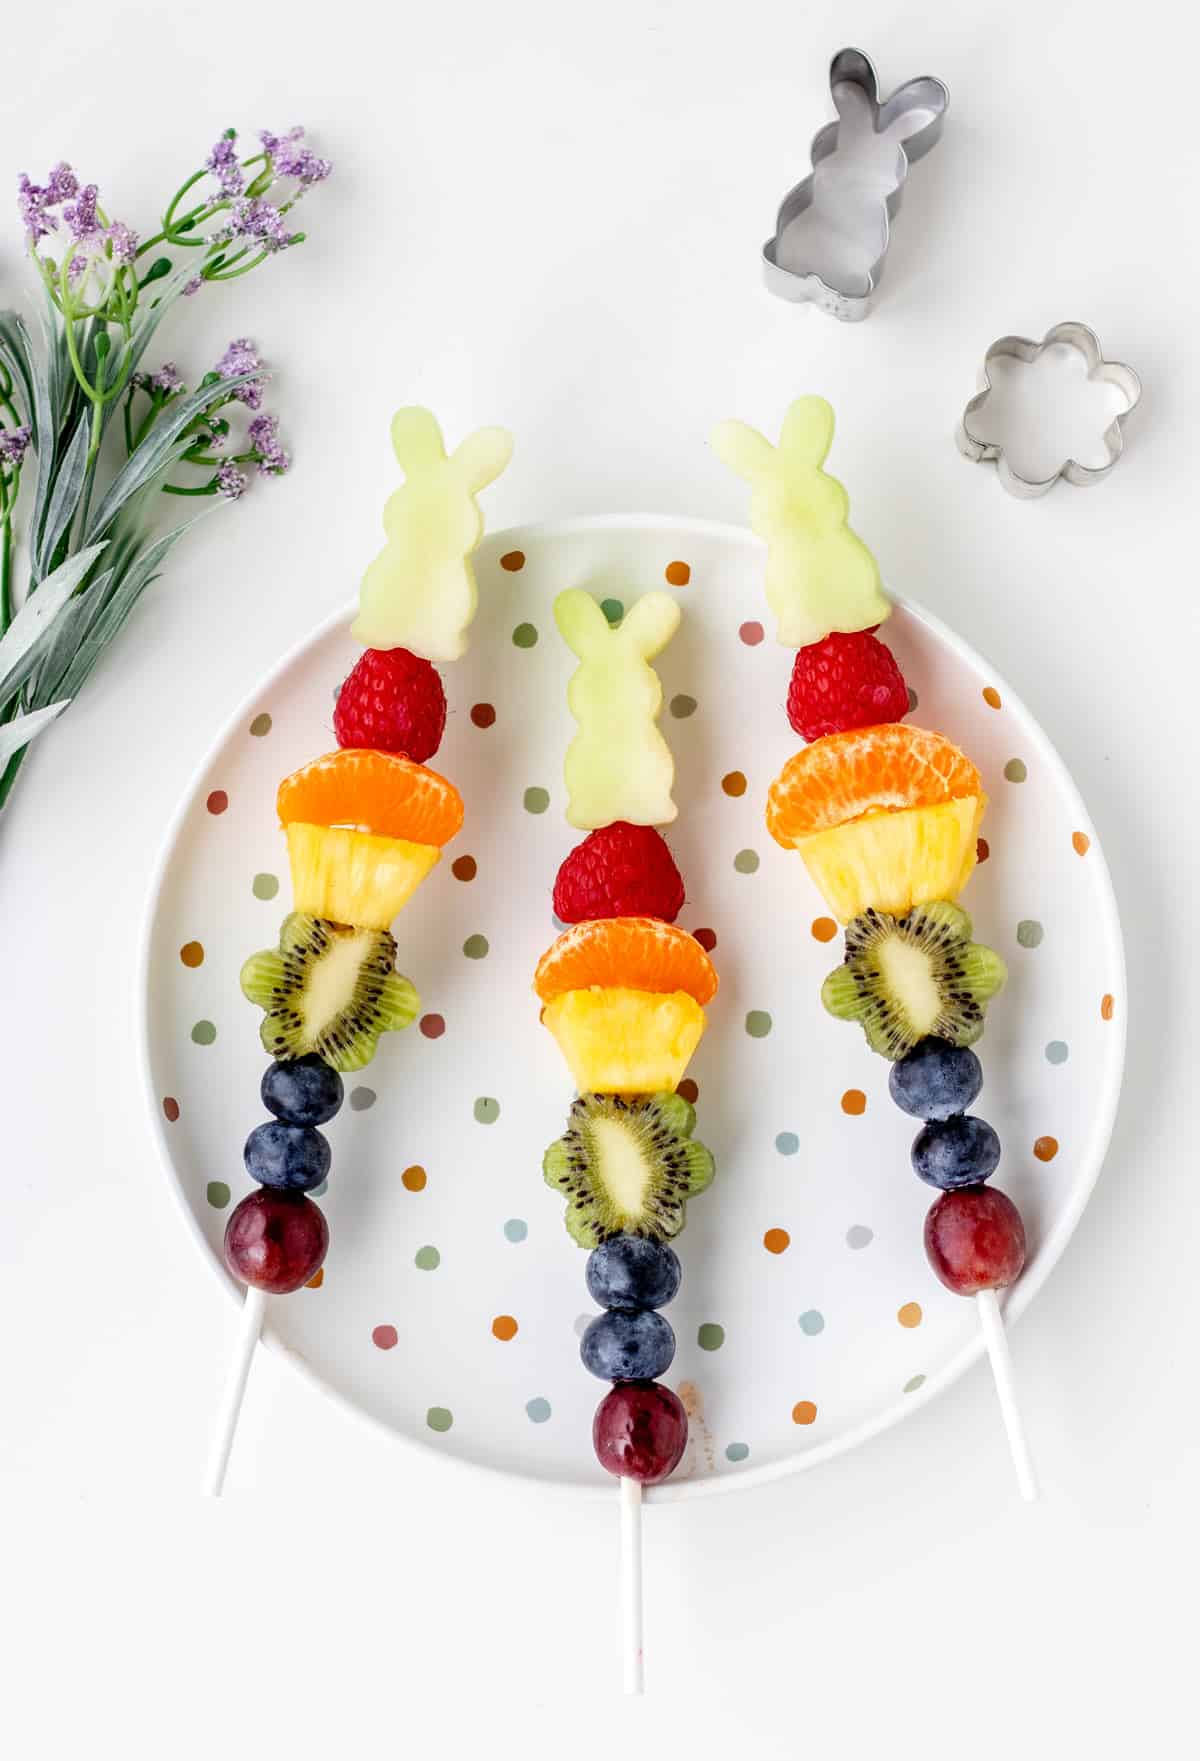 3 Easter fruit kabobs on a white polka-dotted plate.